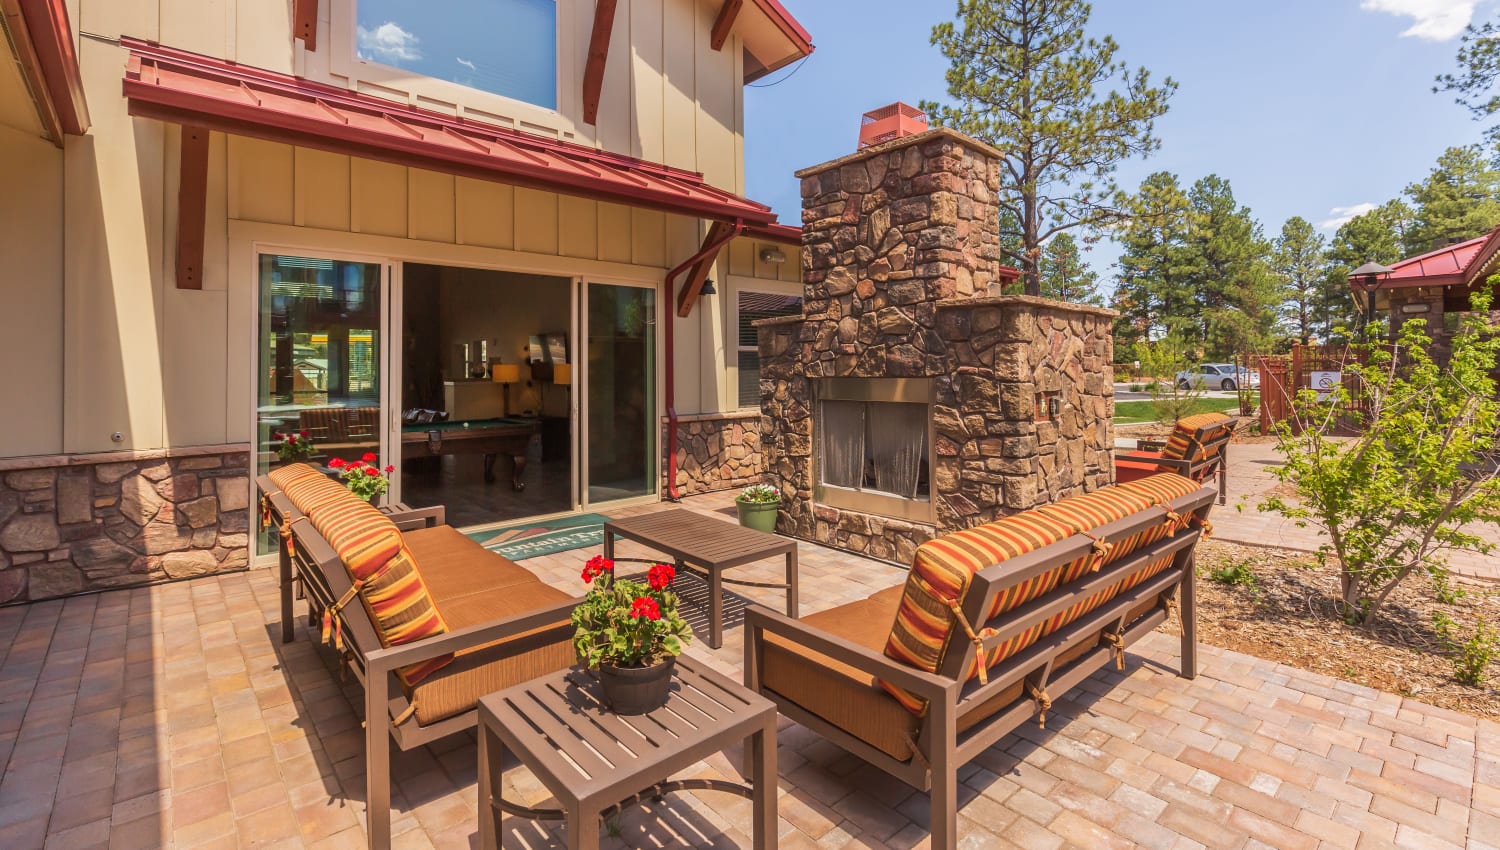 Outdoor patio seating by a beautiful stone fireplace at Mountain Trail in Flagstaff, Arizona